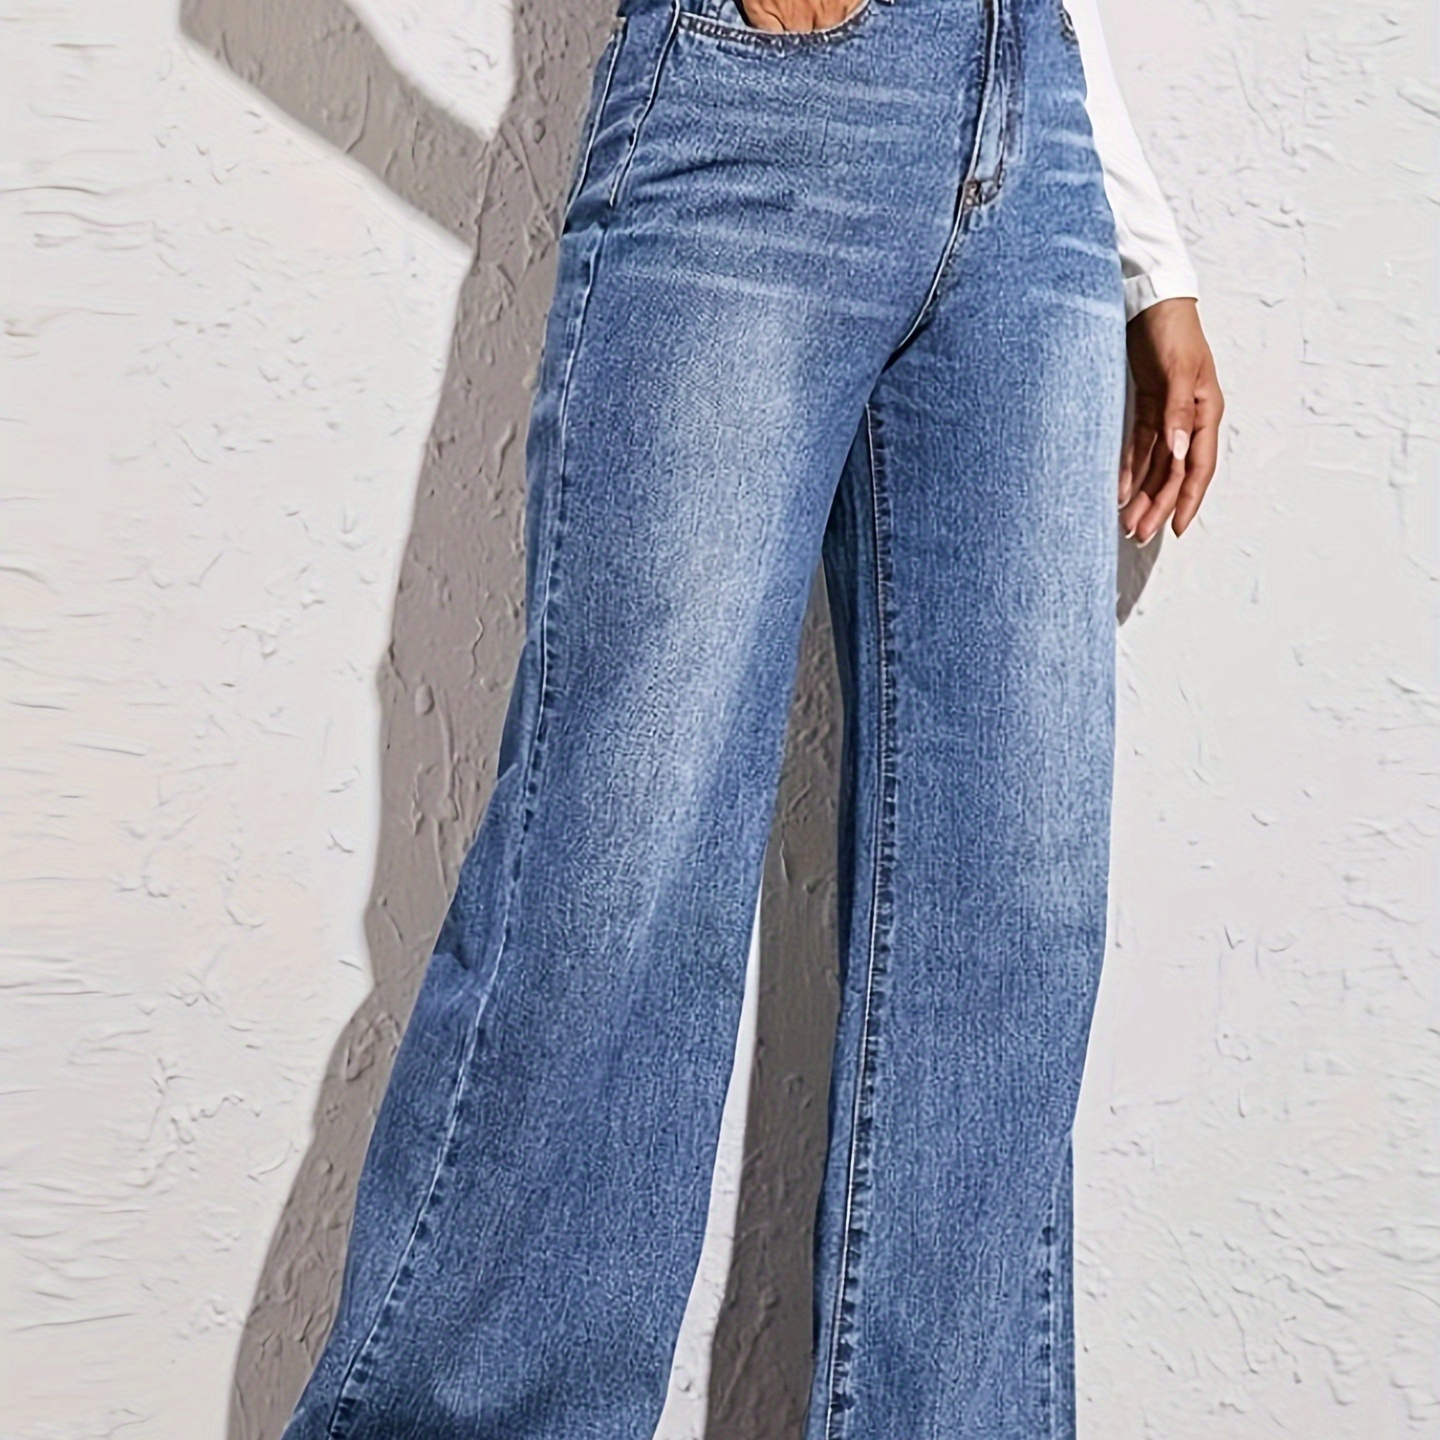 

Women's High Waist Vintage Flared Denim Jeans, Classic Retro Wide Leg Trousers, Casual Fashion Pants For Ladies